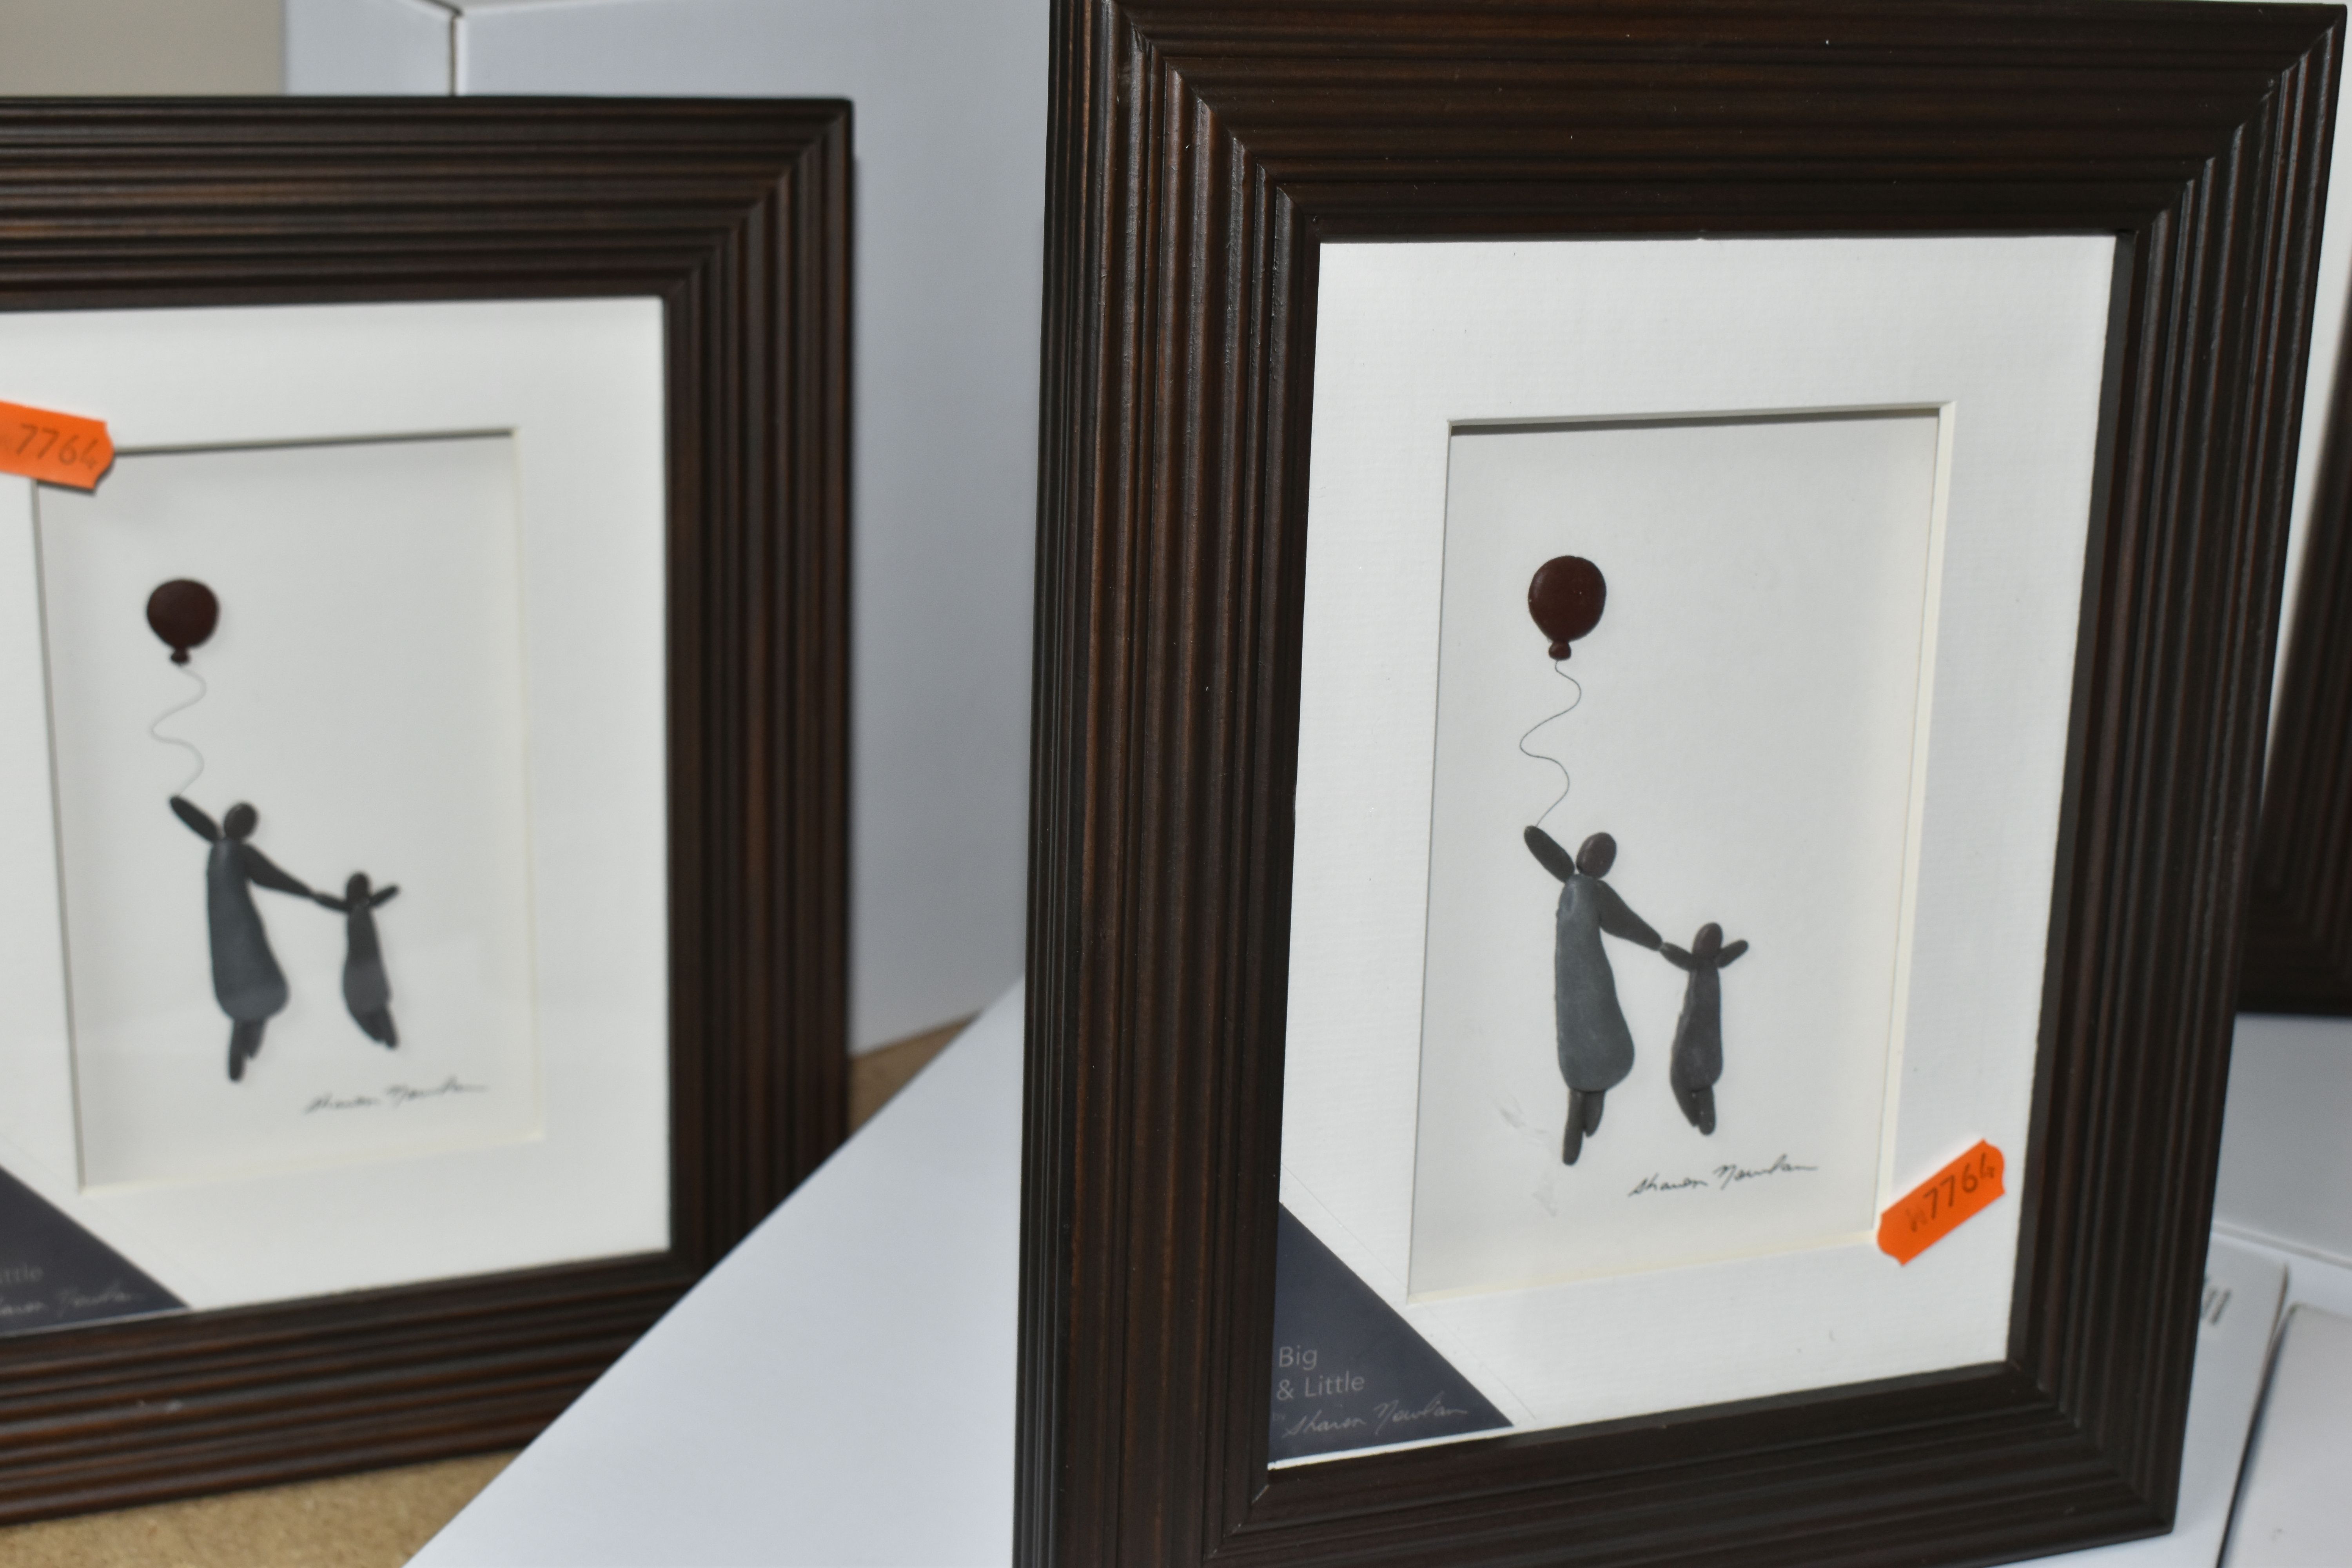 TEN NEW AND UNUSED BOXED SHARON NOWLAN PEBBLE ART DESIGNS, Demdaco framed designs comprising - Image 3 of 5